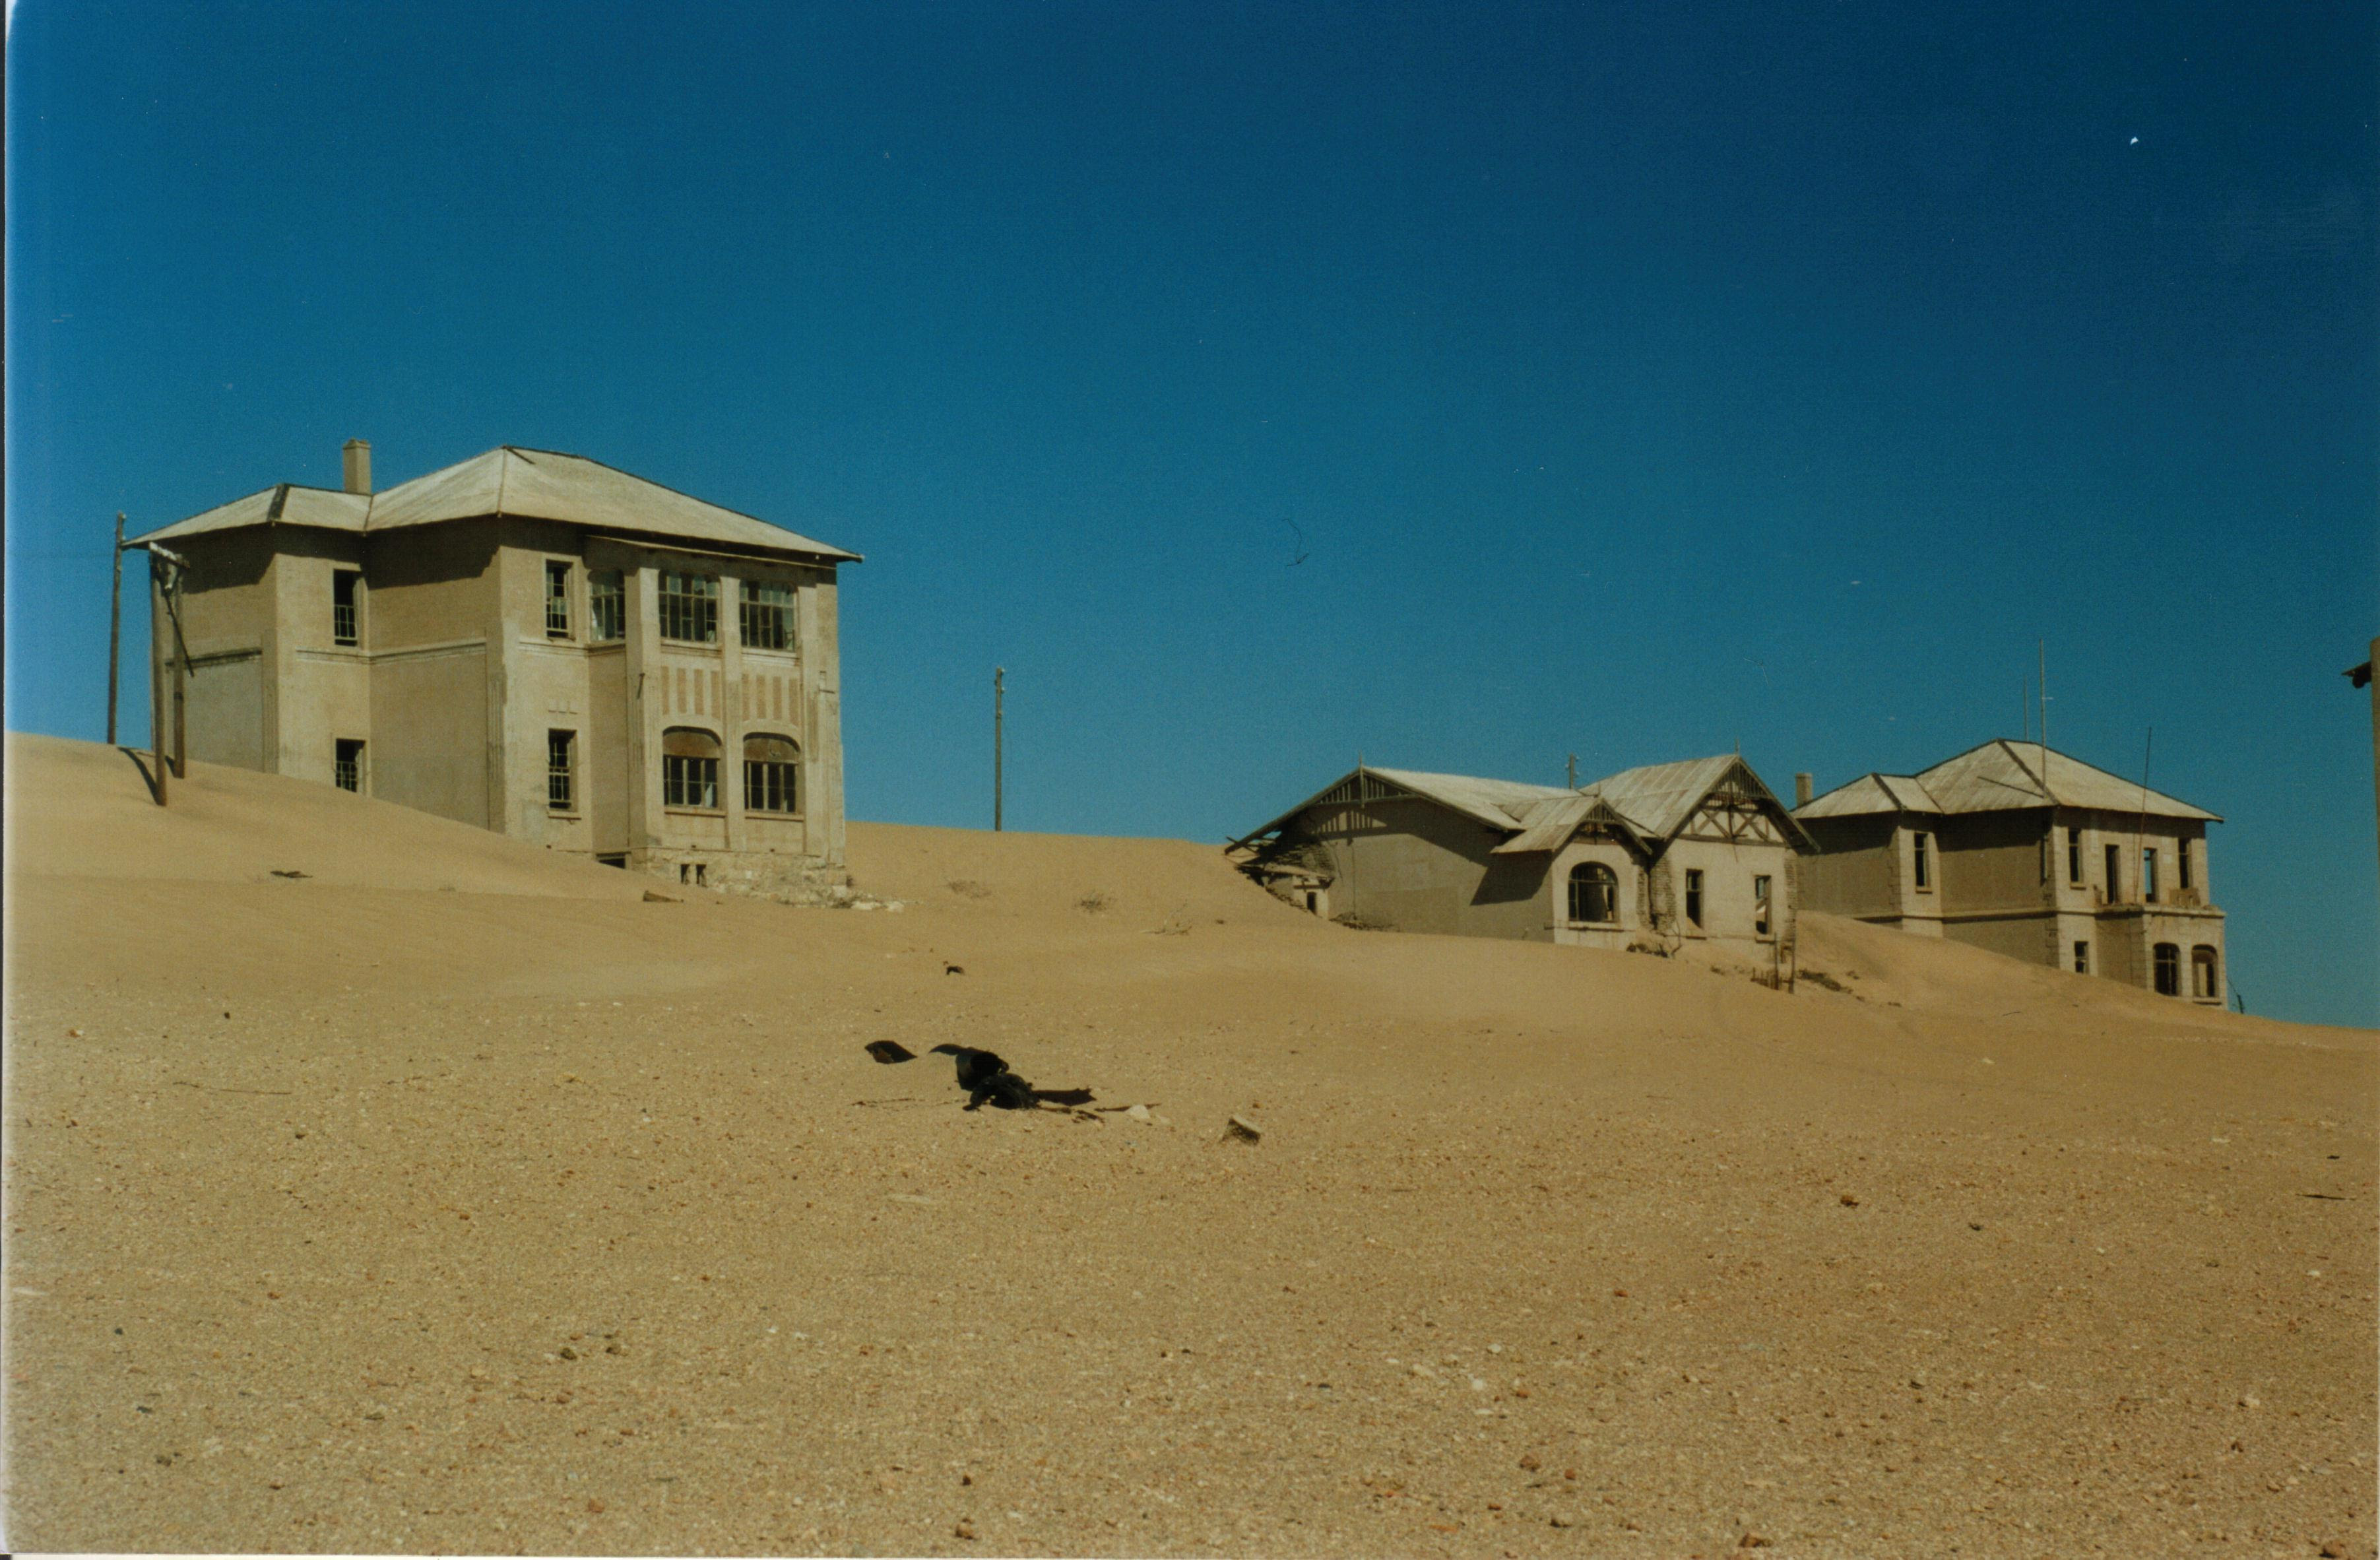 http://mirror-us-ga1.gallery.hd.org/_exhibits/places-and-sights/_more2002/_more11/Namibia-Kolmanskop-ghost-town-near-Luederitz-SMO.jpg